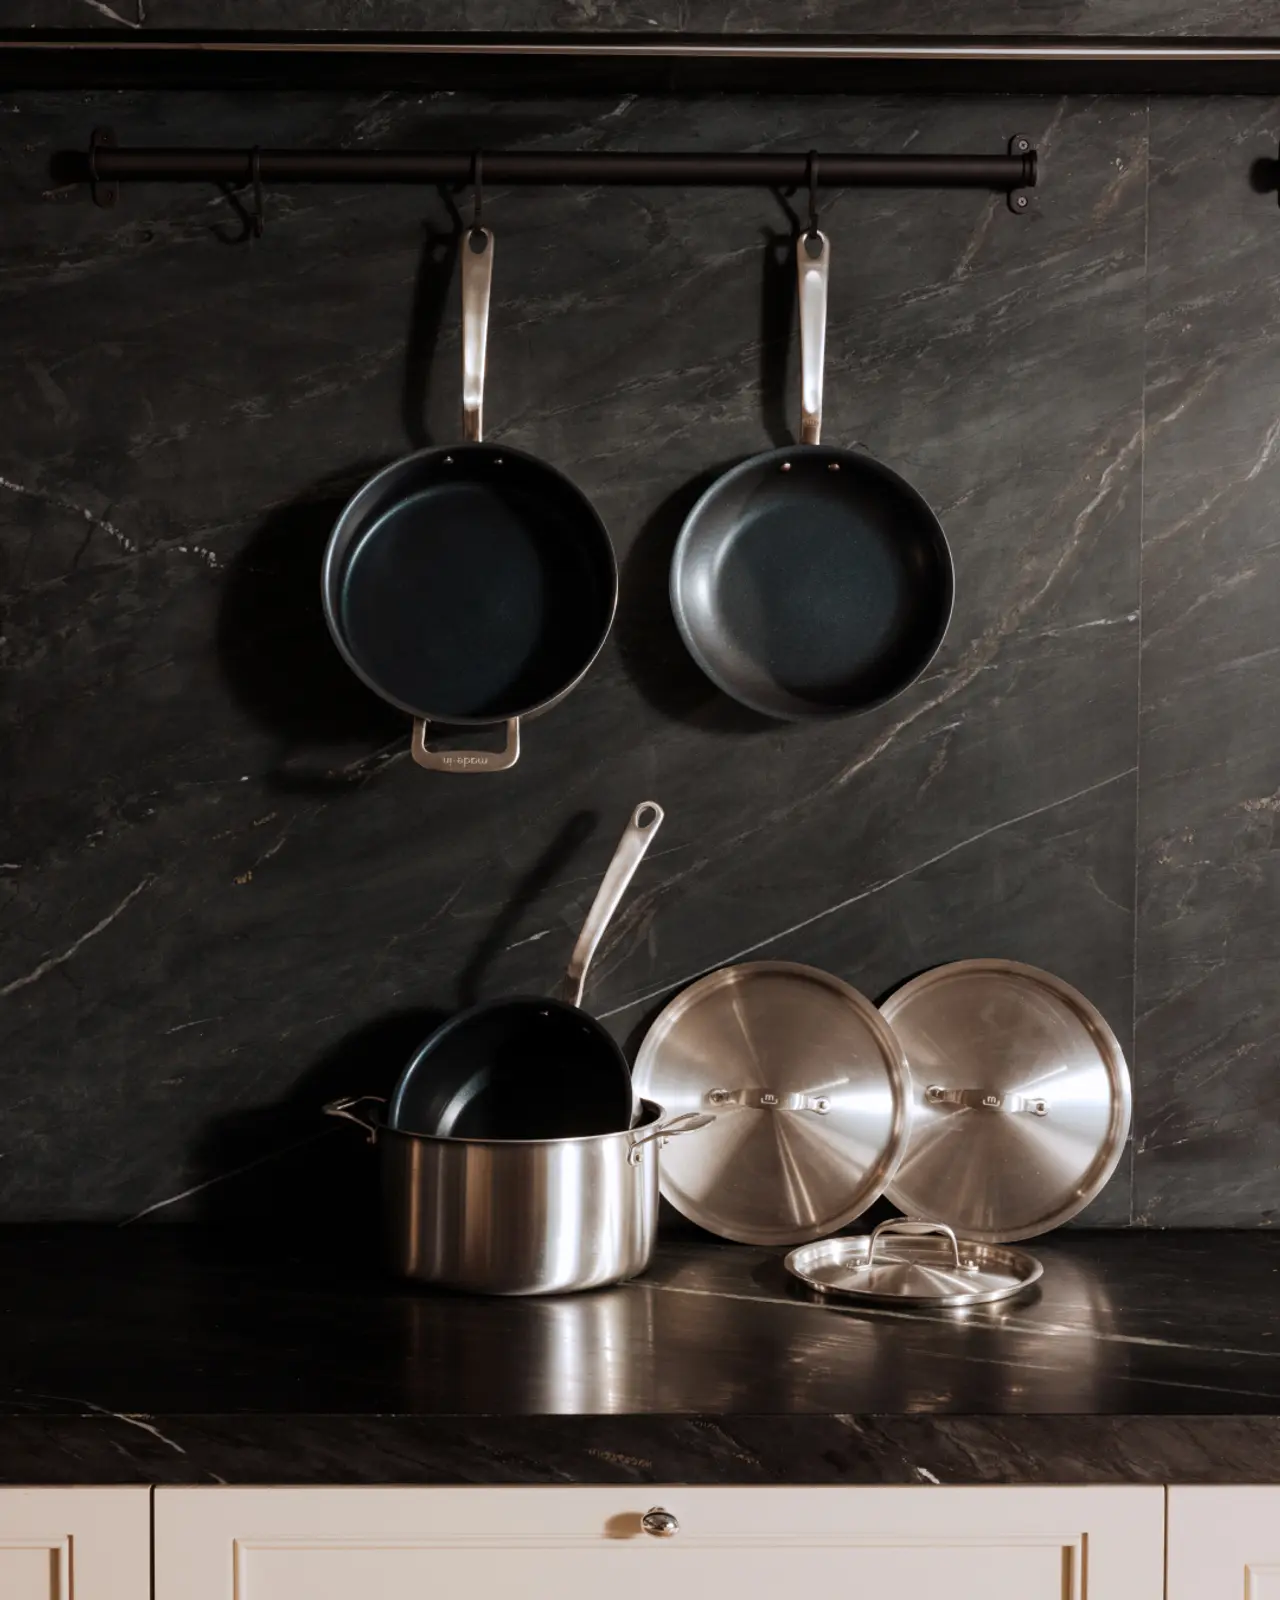 Hanging pans and pots with lids rest on a kitchen counter against a dark marble backsplash.